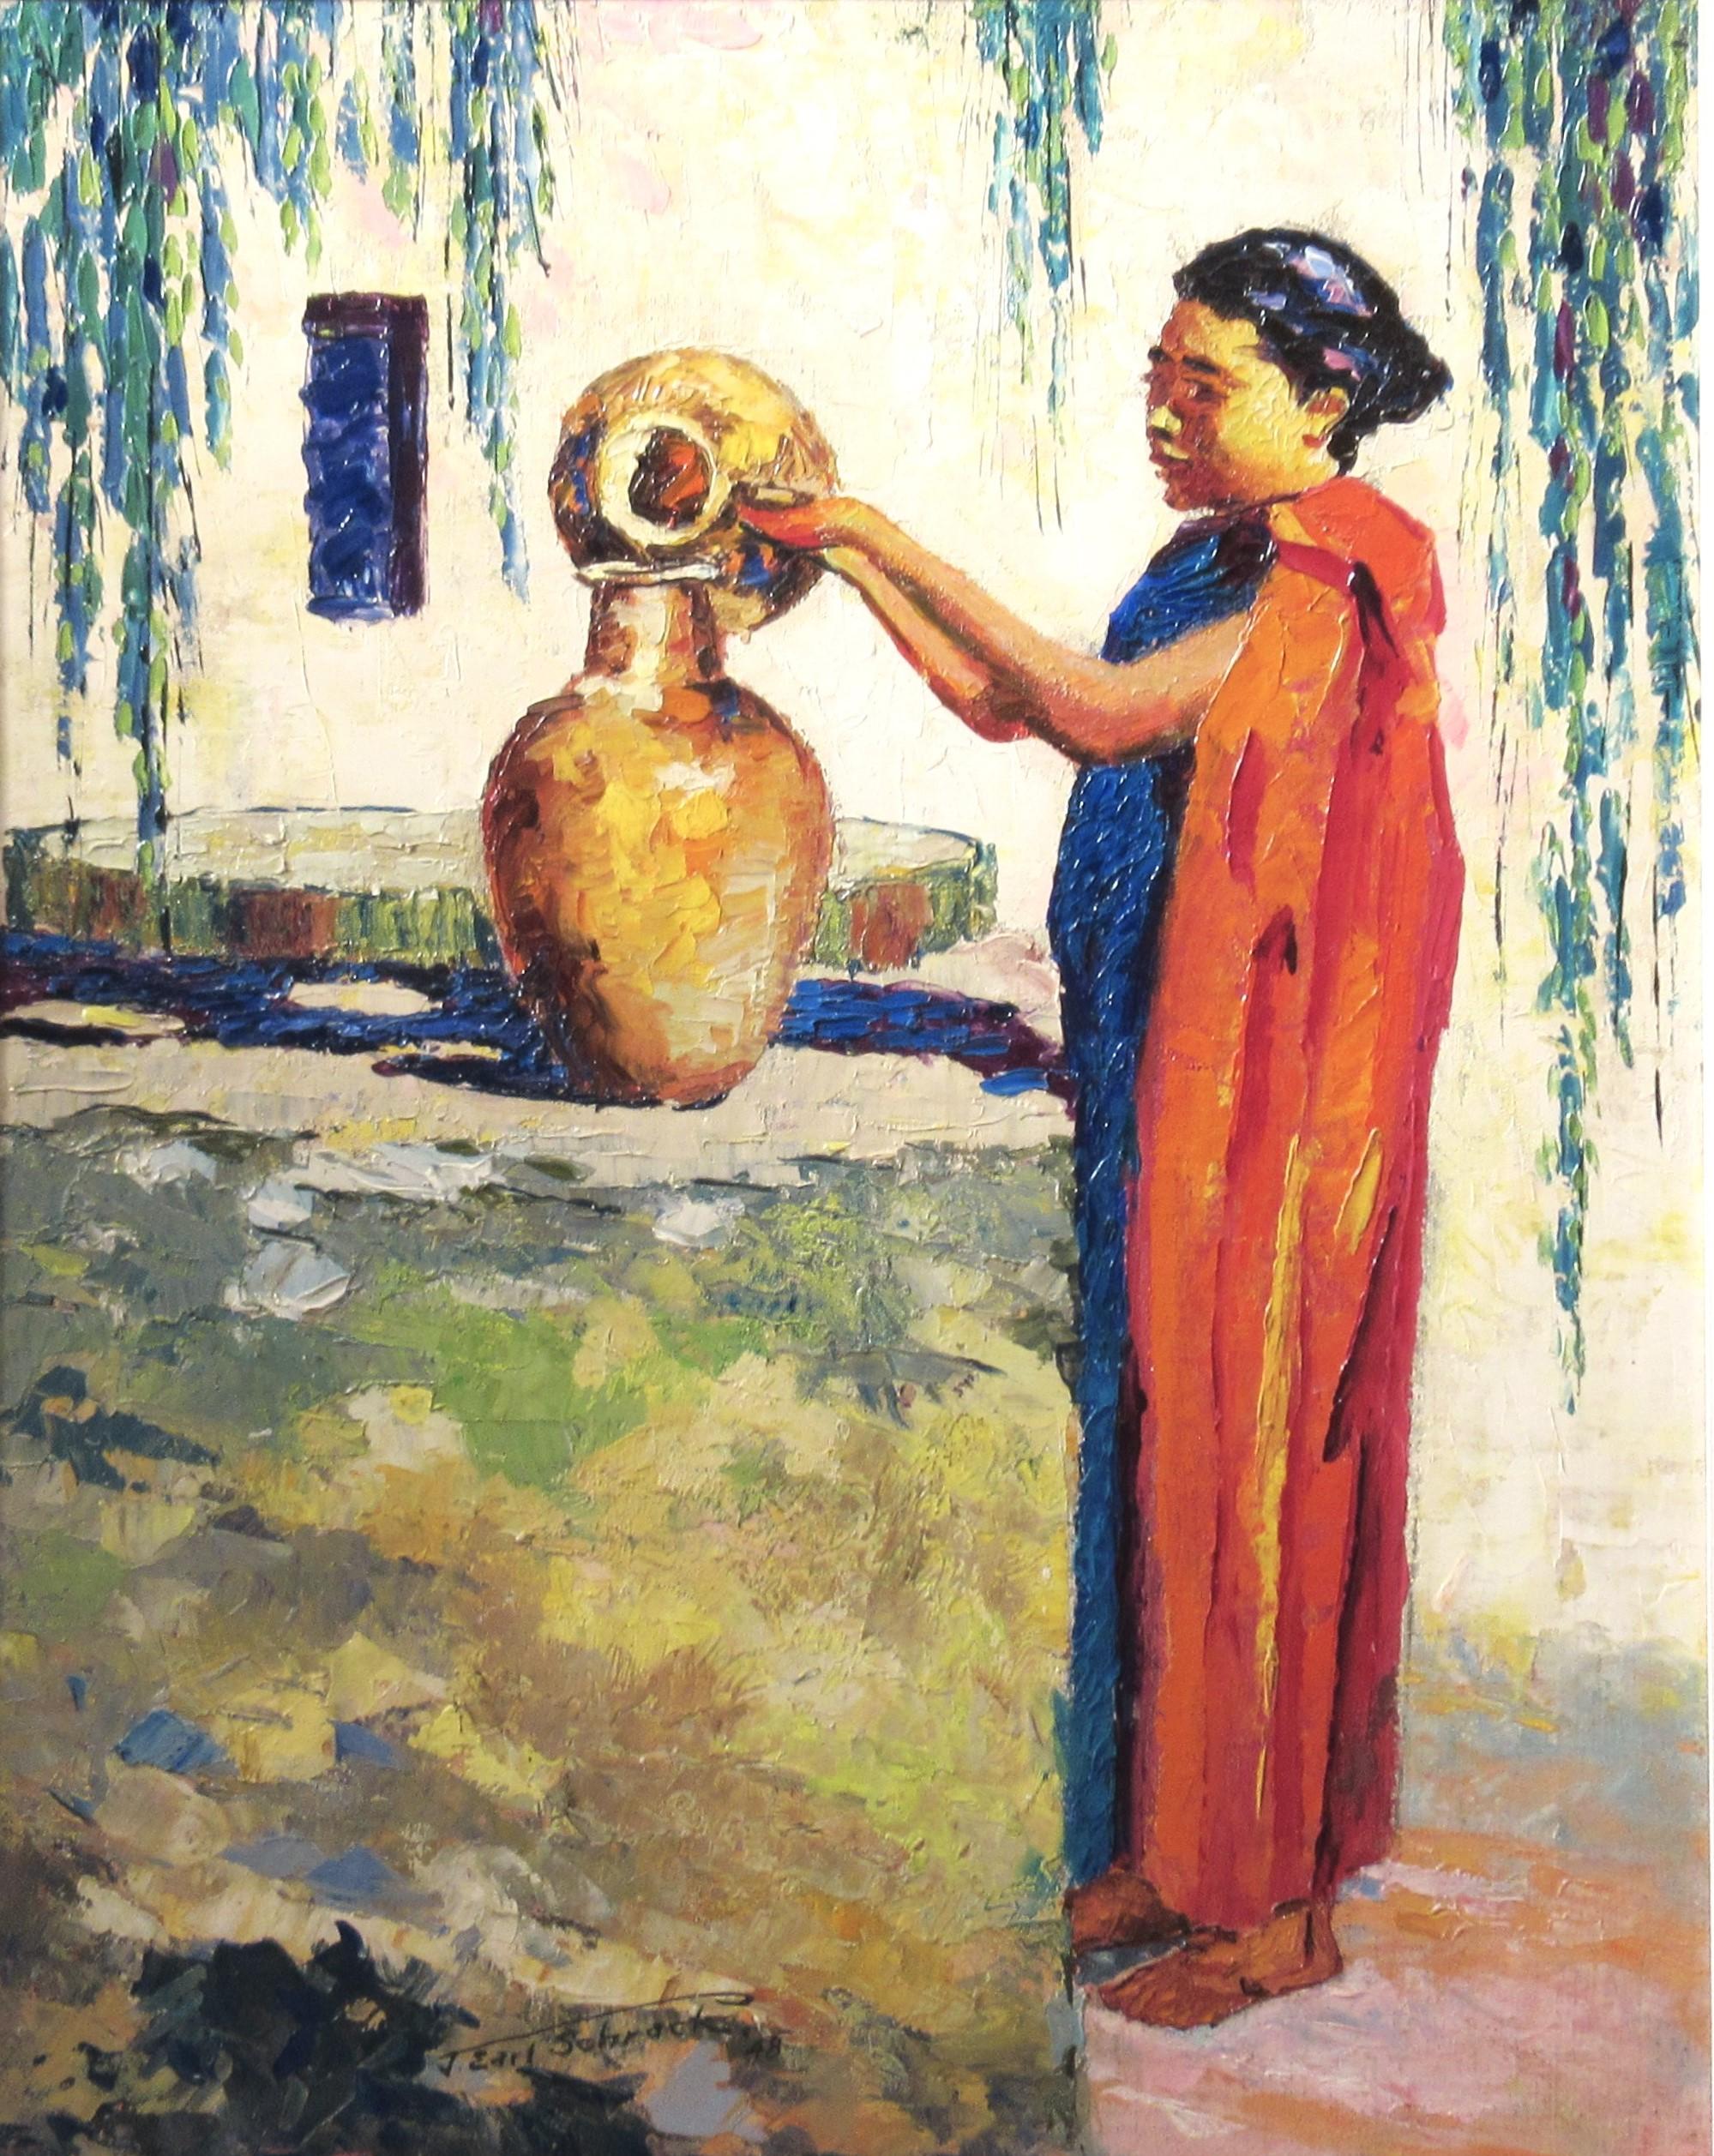 Native Woman at the Well - Painting by Joseph Earl Schrack